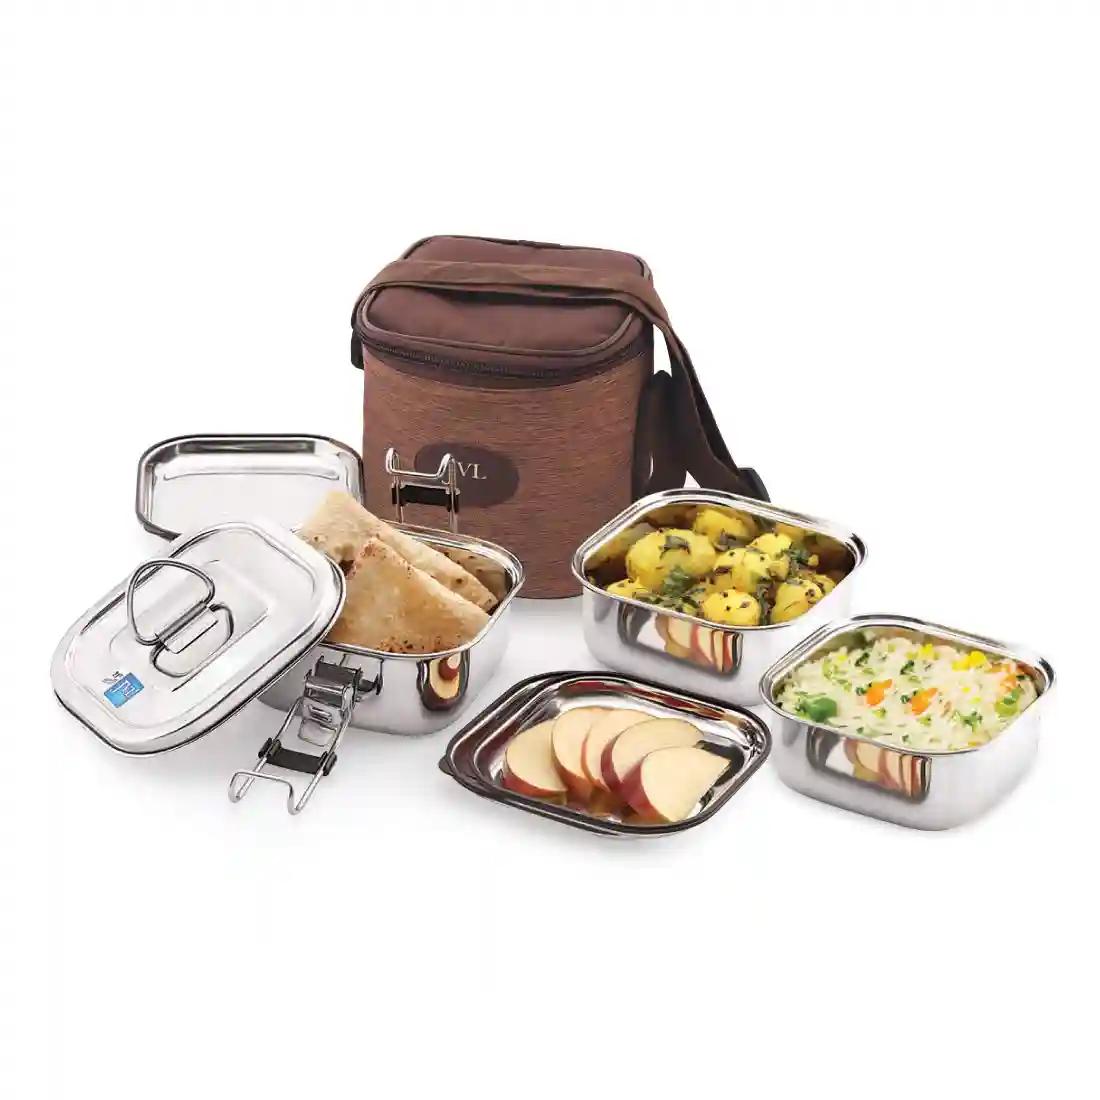 Jvl Stainless Steel Lunch Box For Kids, Triple Three Layer Leak Proof Tiffin Box For School And Office Use With Inner Plate - Square - Small Size